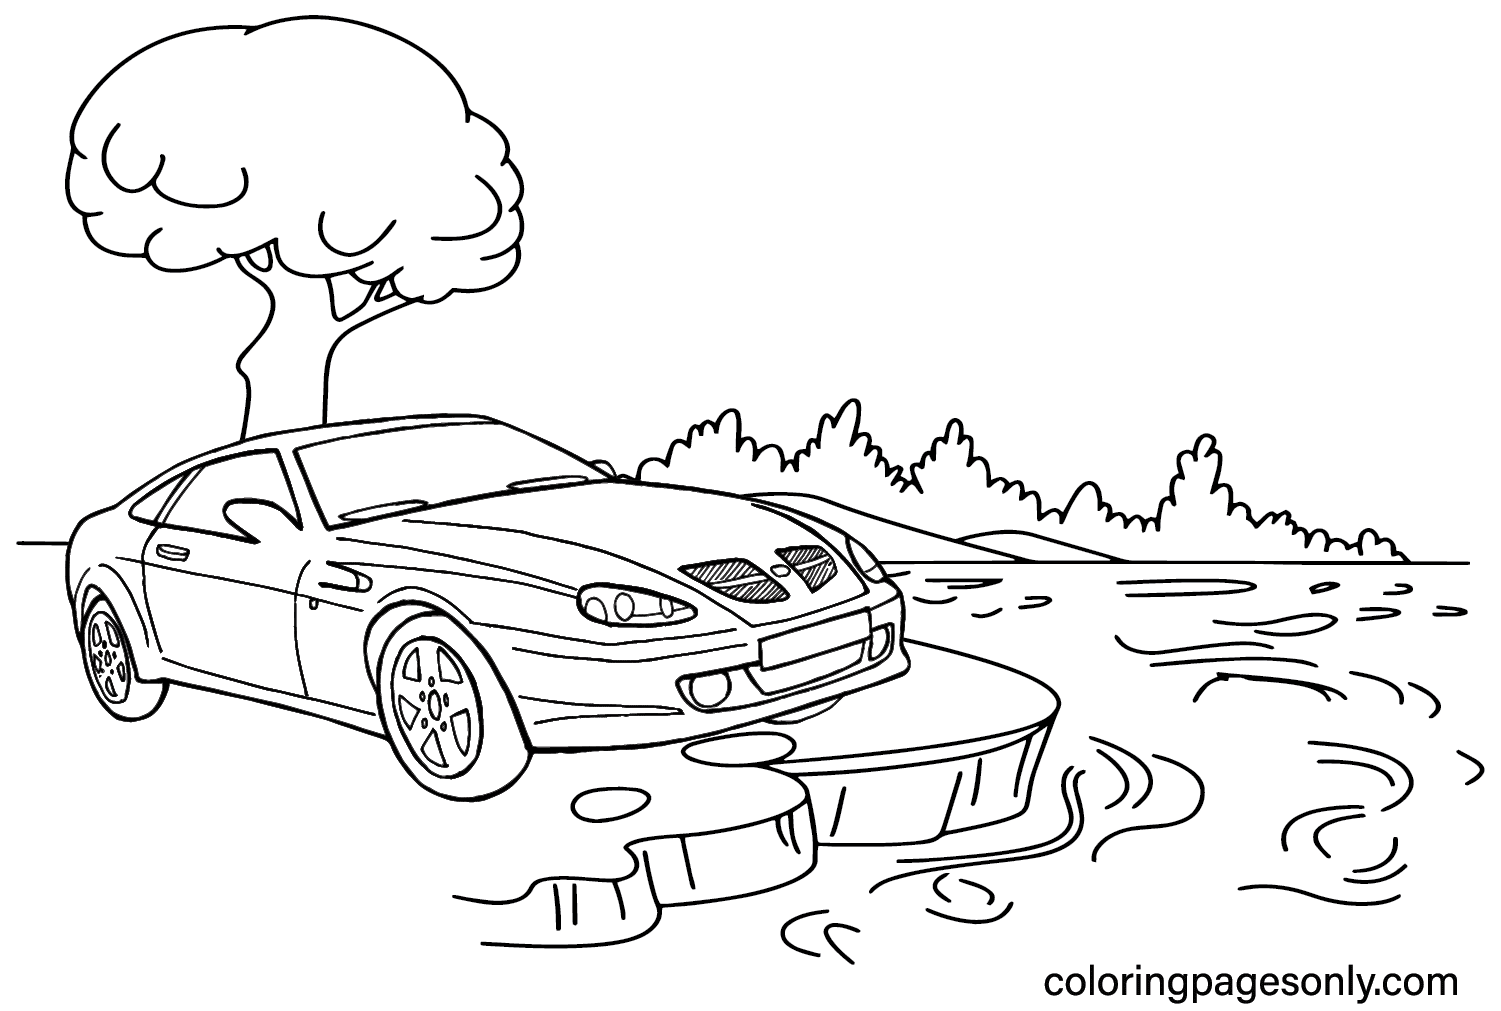 MG X80 Coloring Page from MG